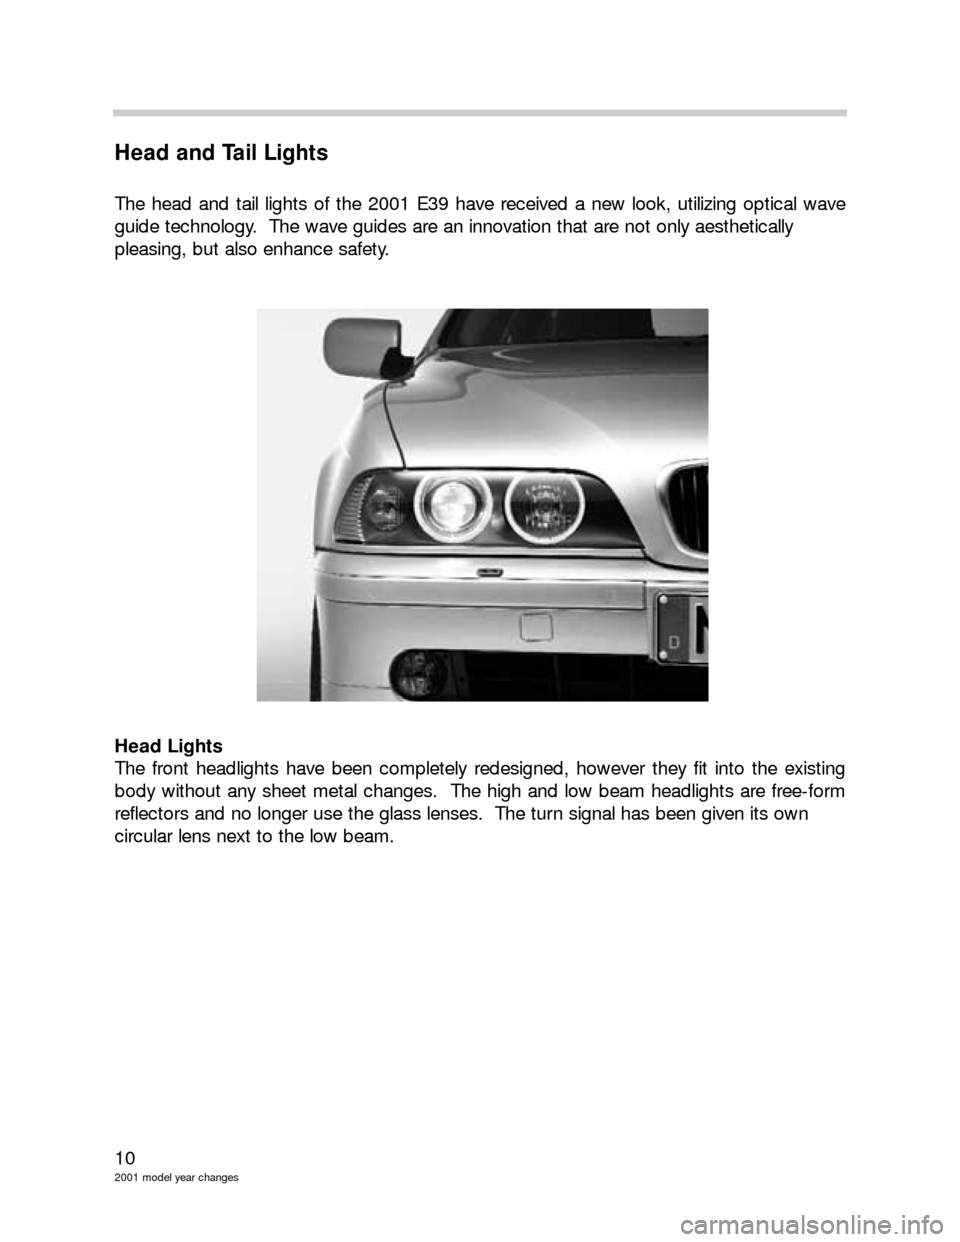 BMW 3 SERIES 2004 E46 Model Yar Changes 10
2001 model year changes
Head and Tail Lights
The head and tail lights of the 2001 E39 have received a new look, utilizing optical wave
guide technology.  The wave guides are an innovation that are 